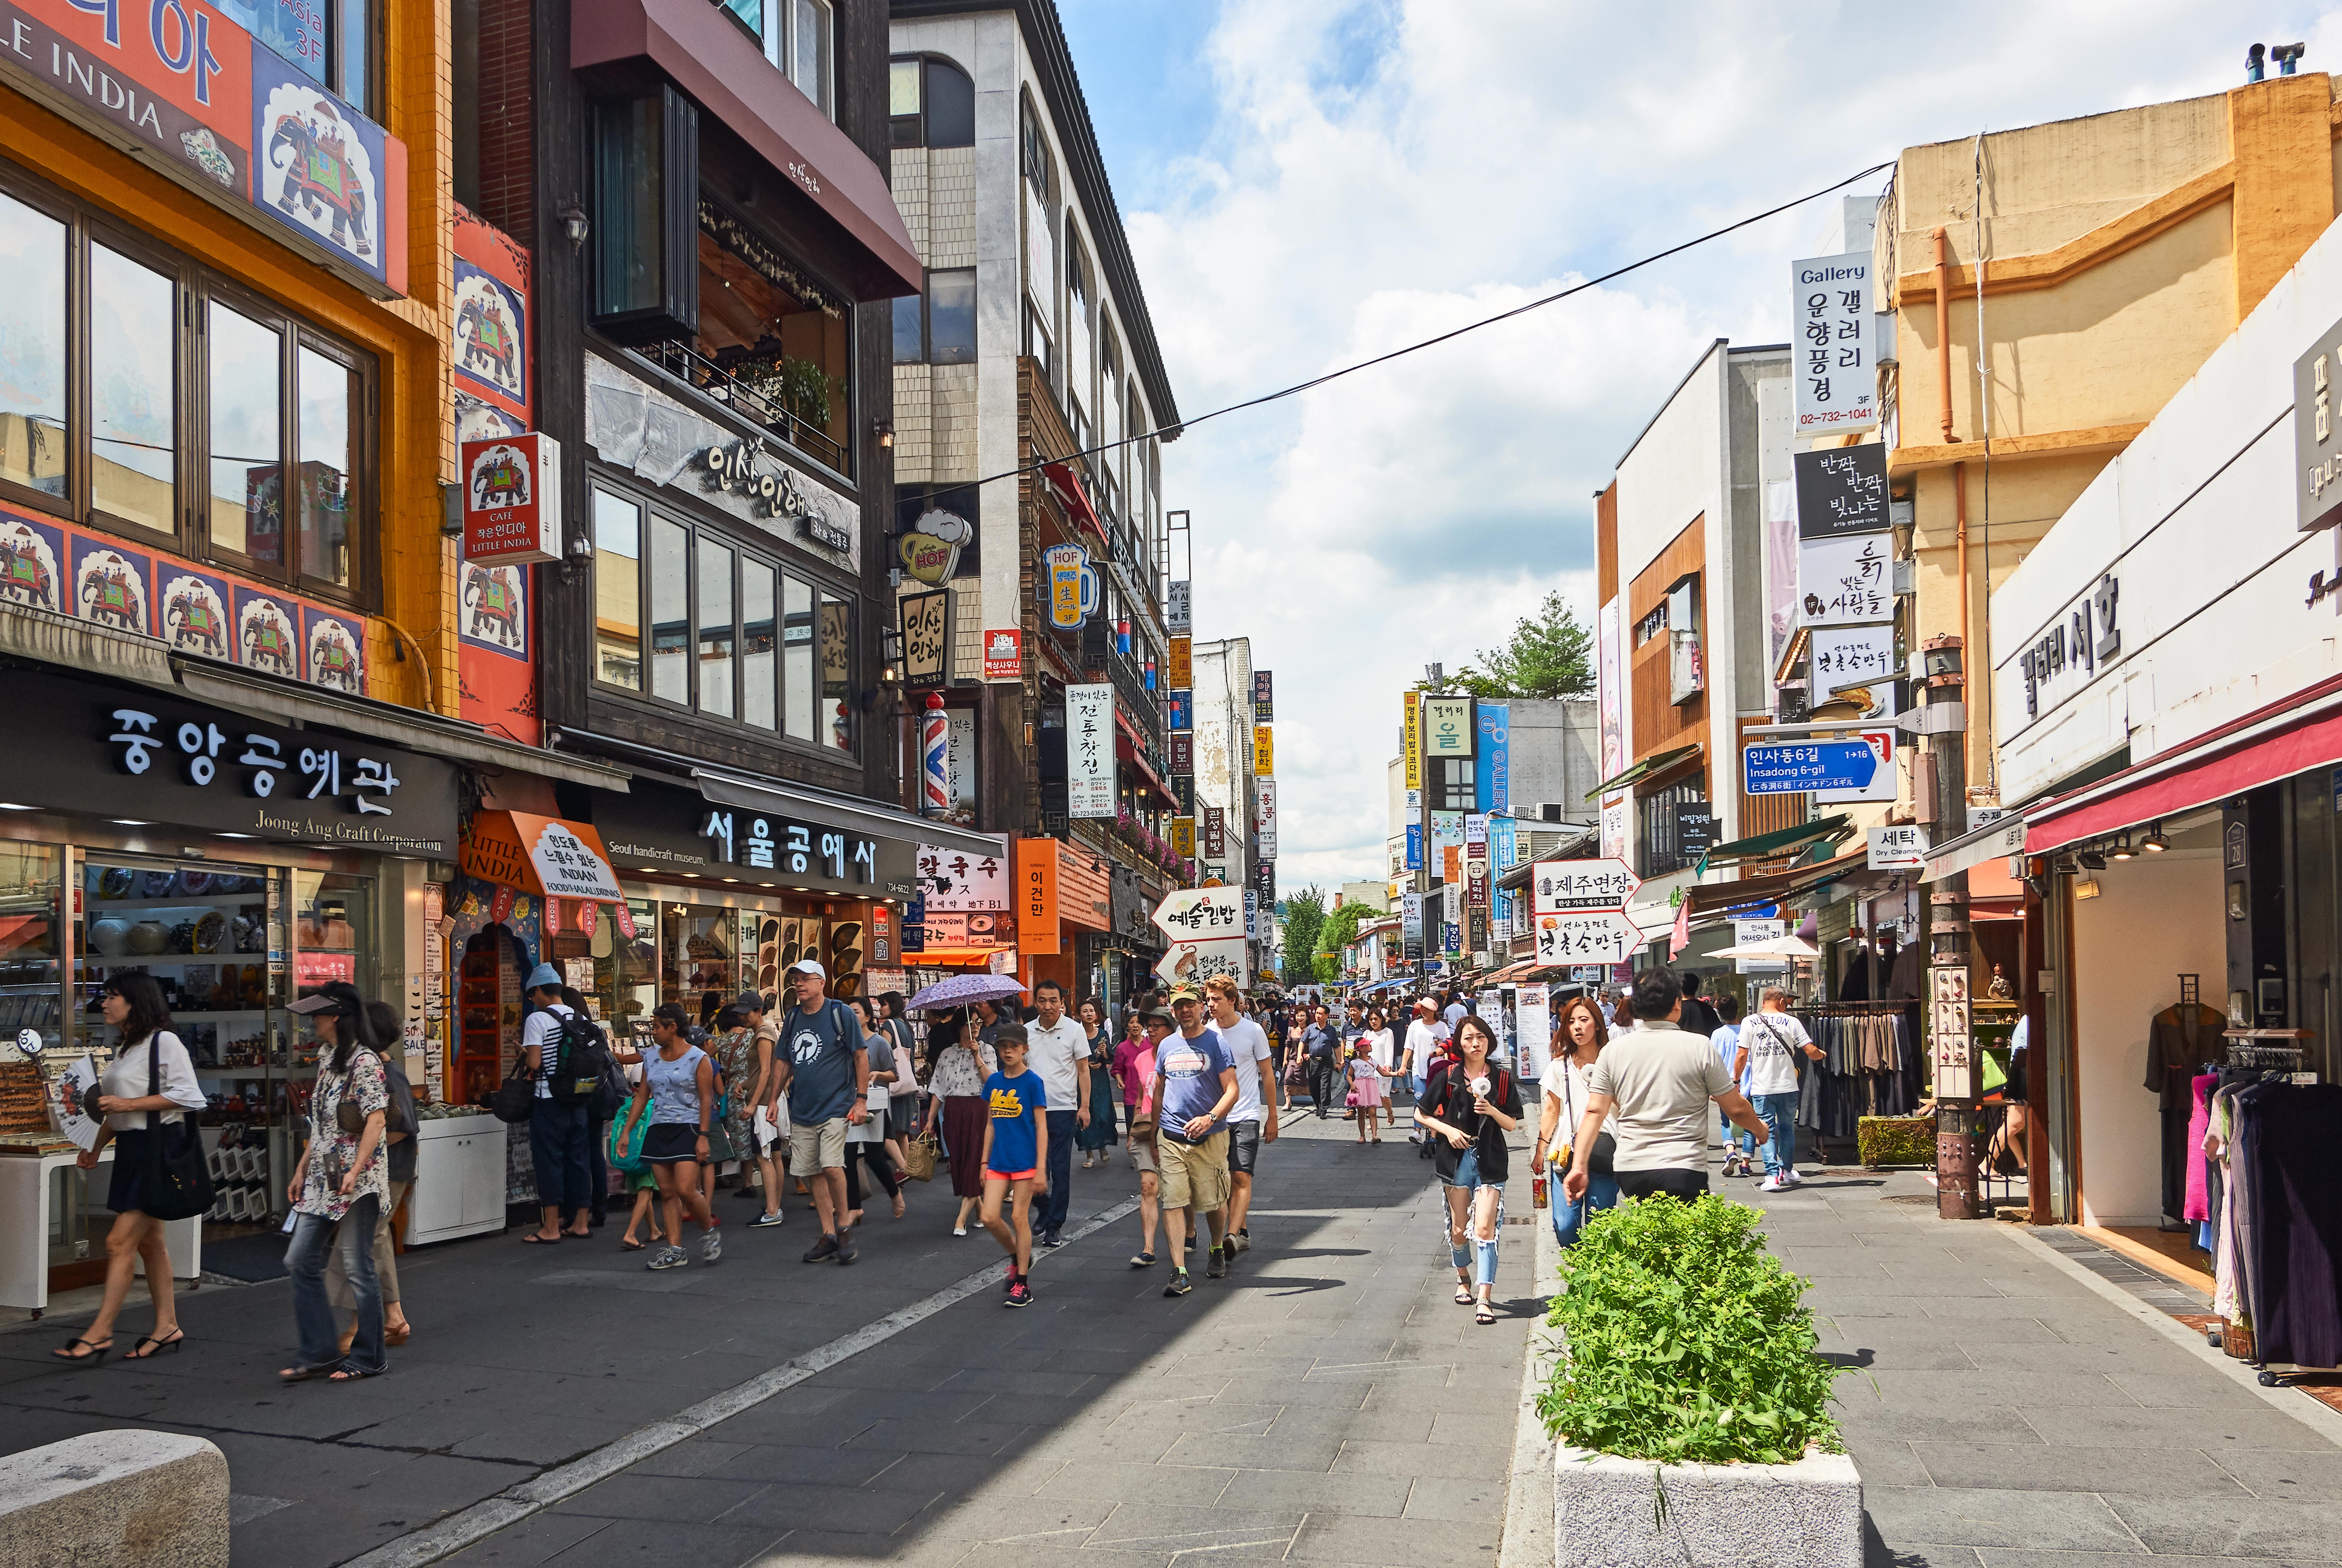 The Best Things to See and Do in Insadong, Seoul